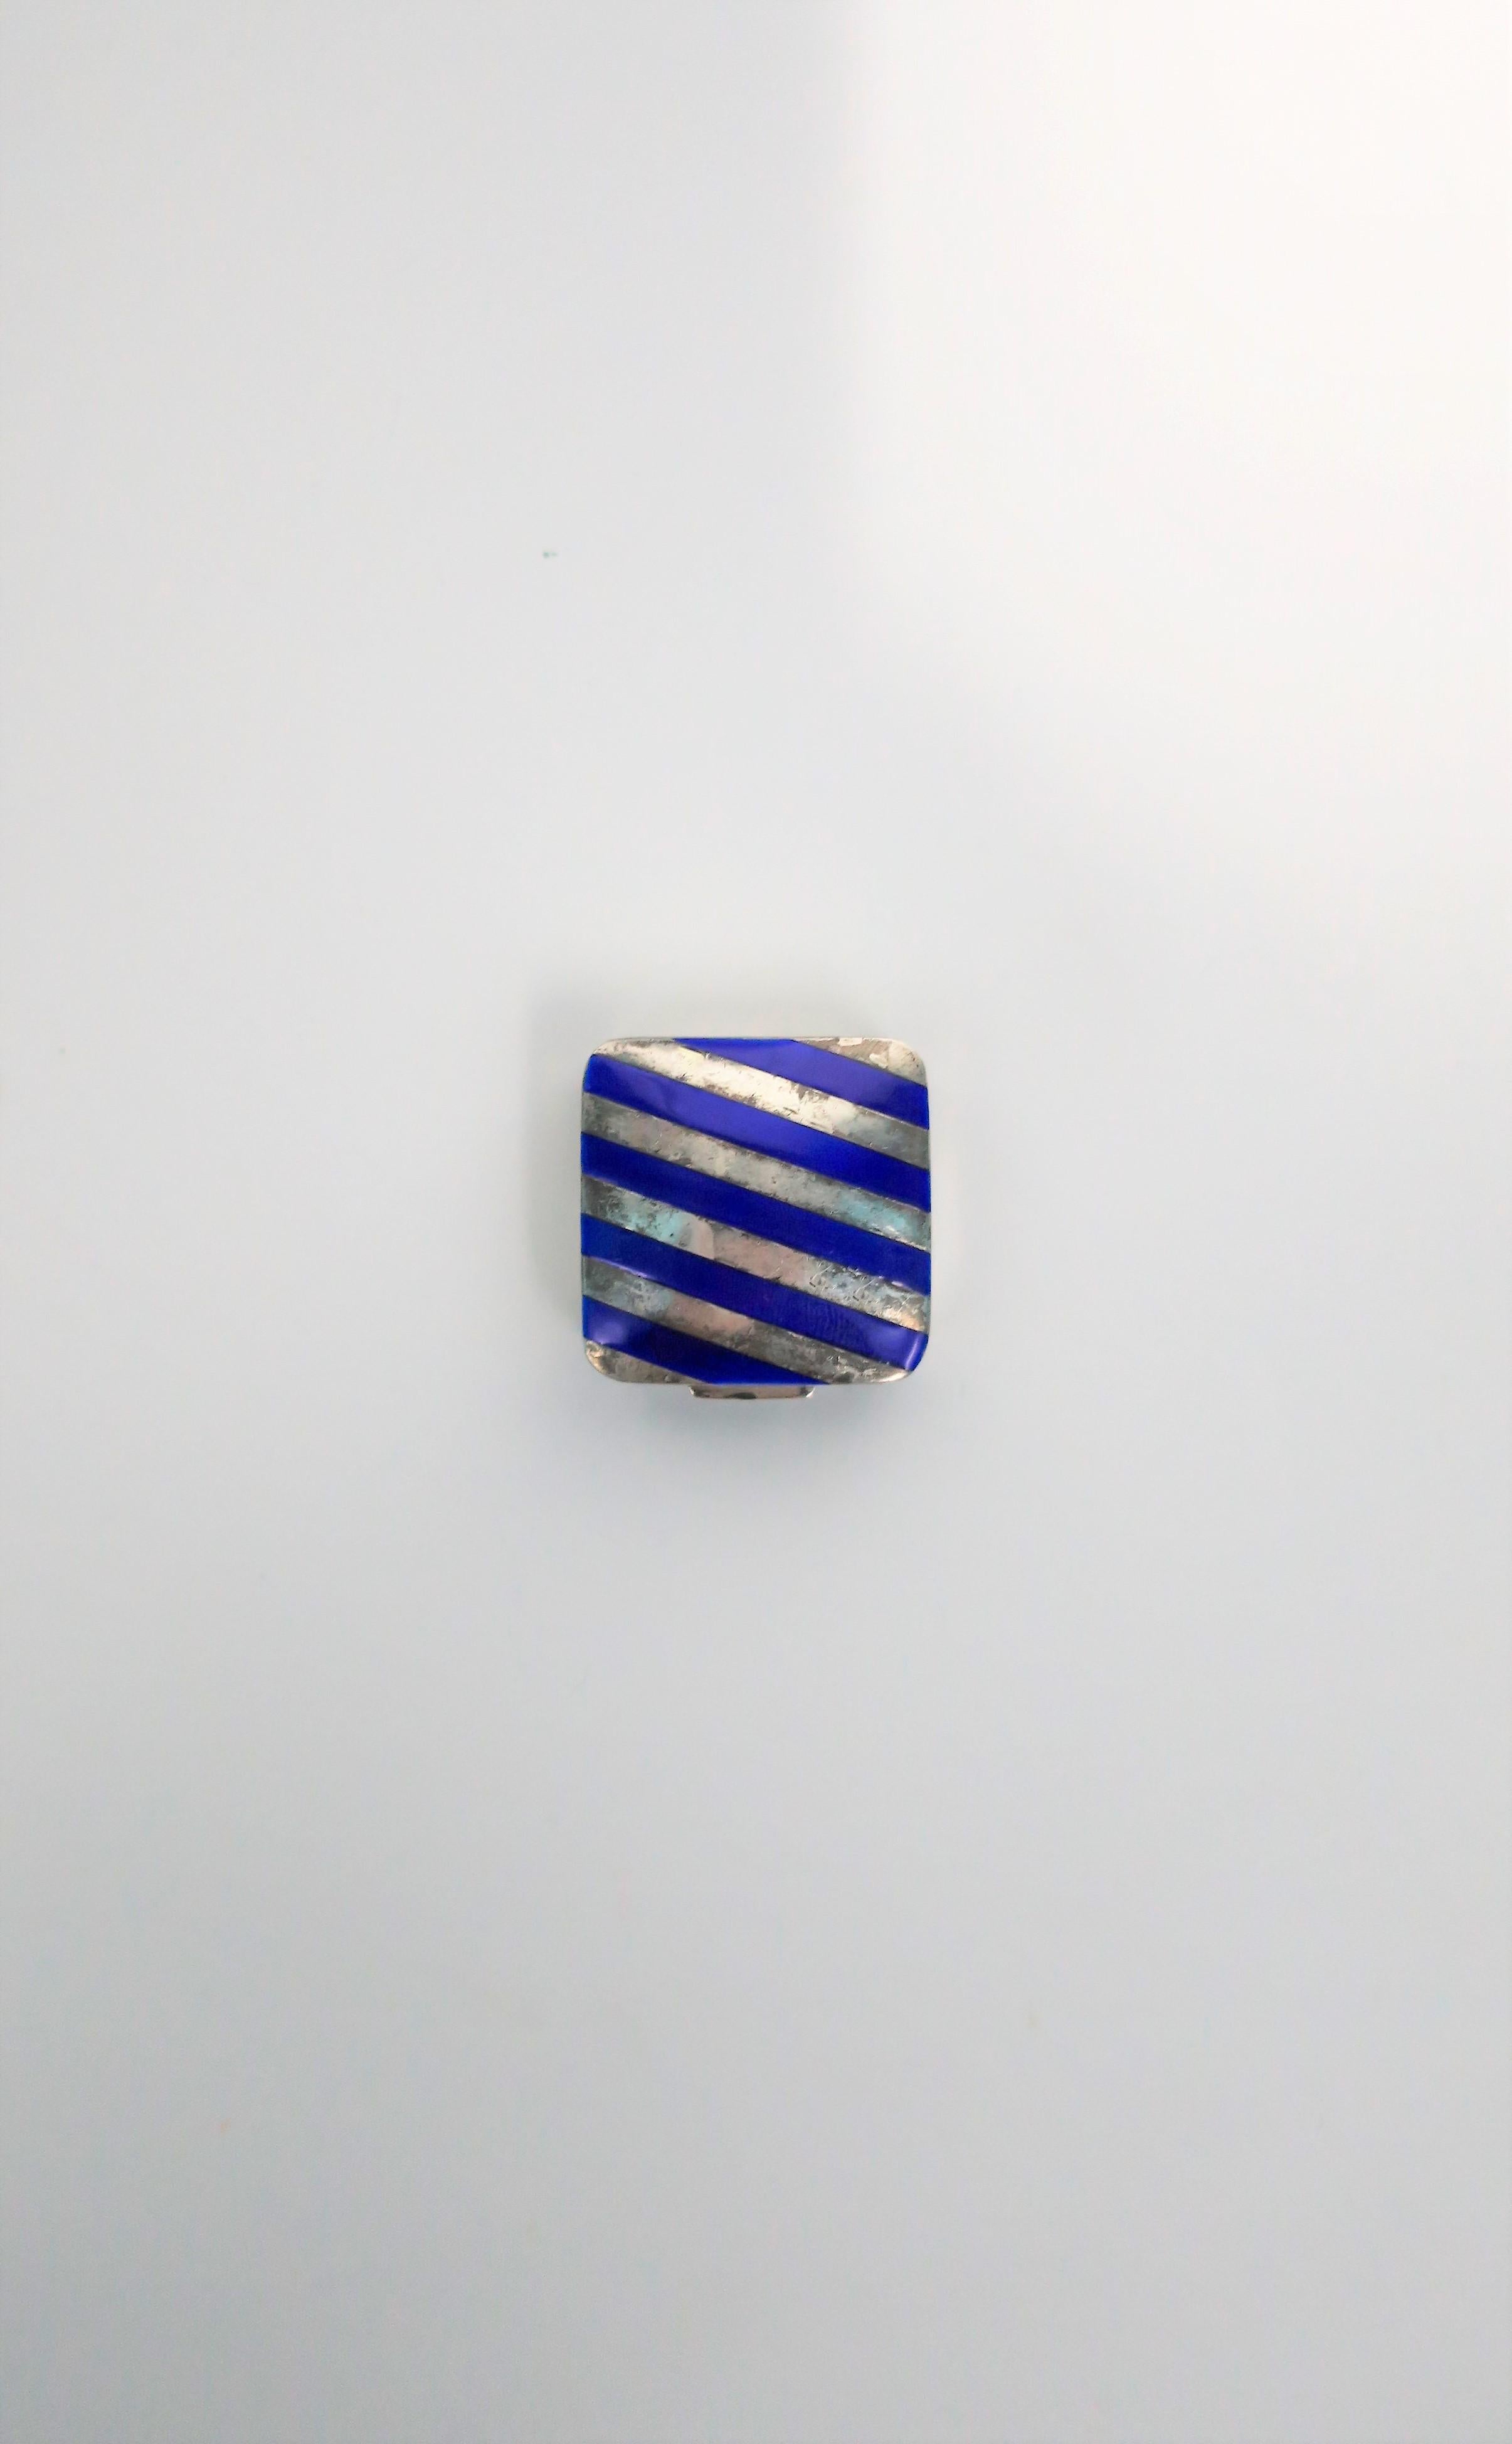 From French luxury maker Cartier, a very beautiful and rare sterling silver and cobalt blue enamel pill box, circa 20th century. Box has a nice weight to it. Piece is marked: 